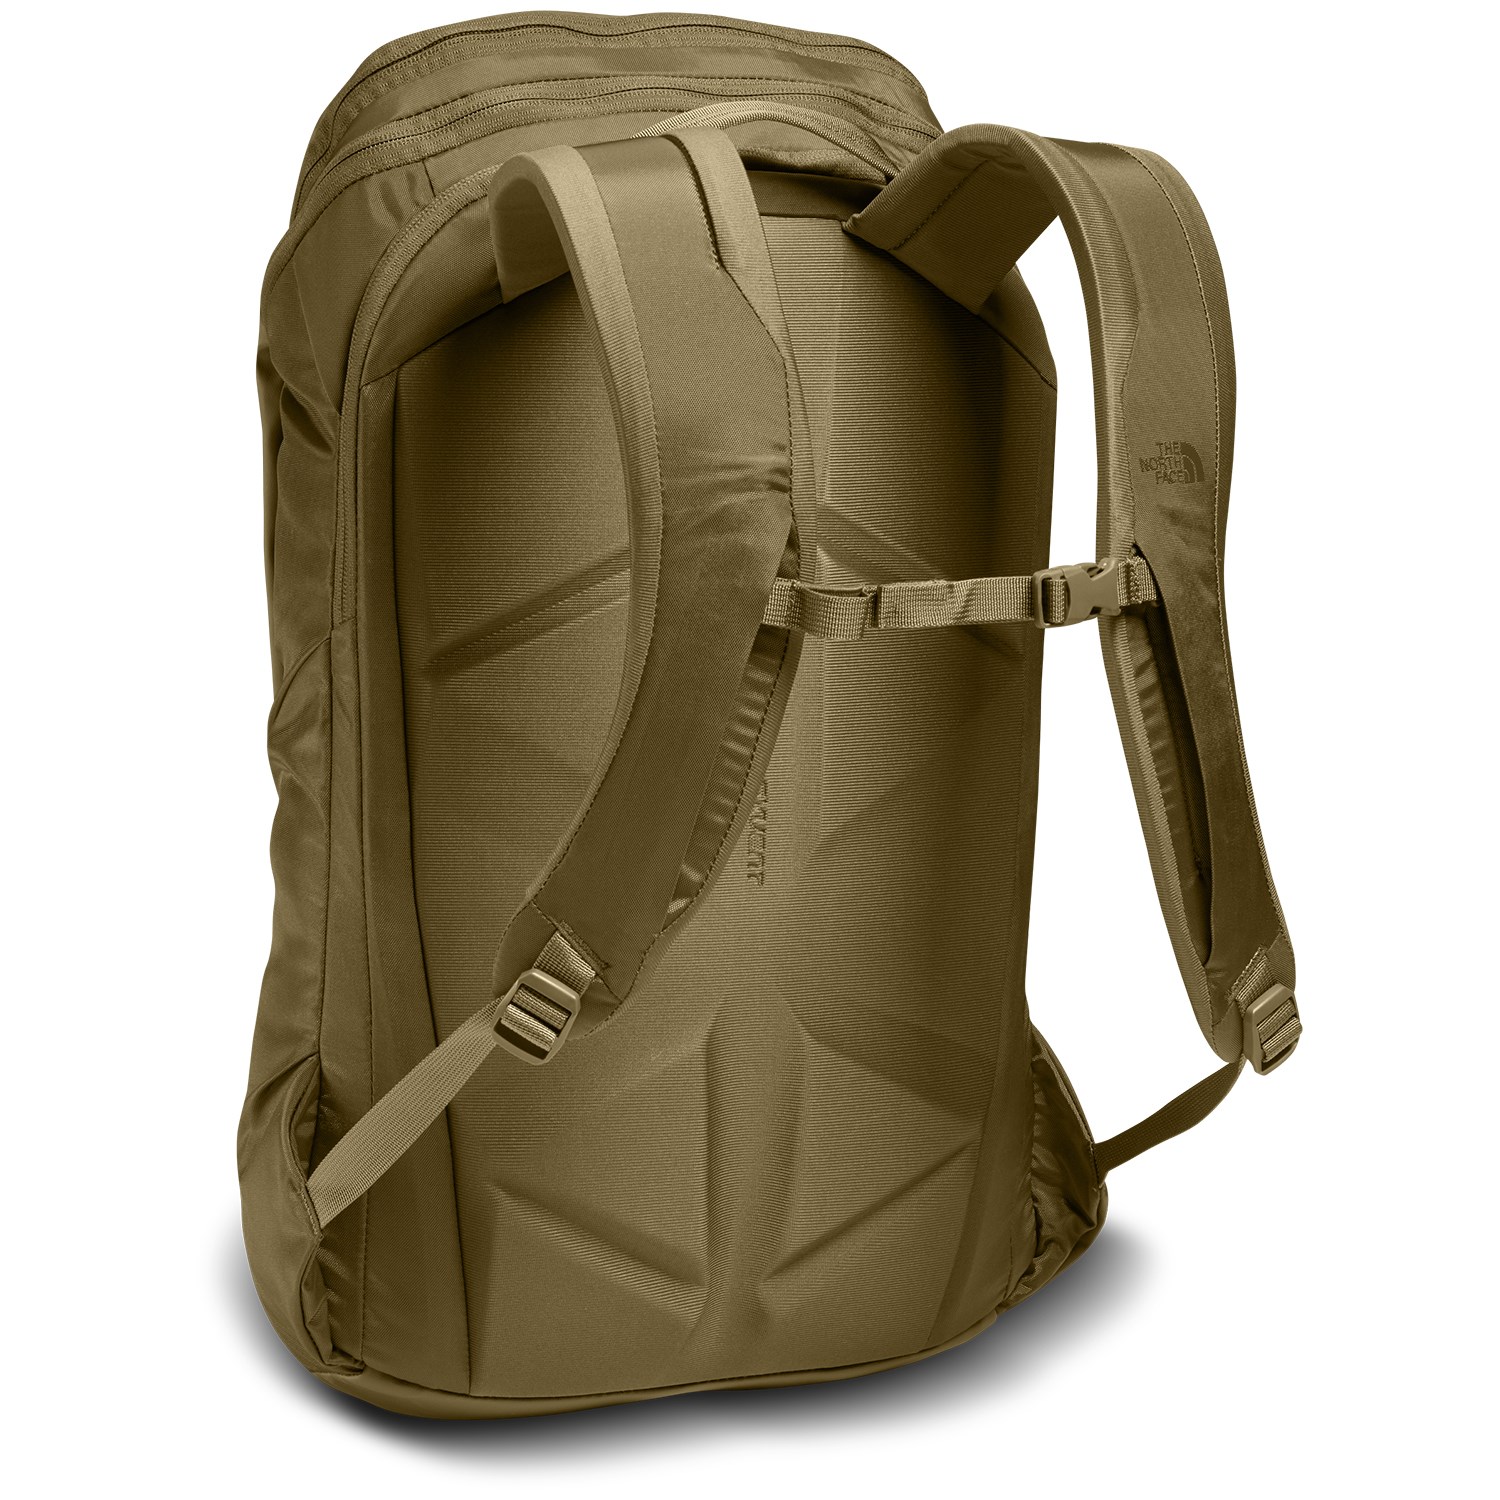 Kaban 2.0 | The North Face | Backpacks, Backpack free, Waxed canvas backpack